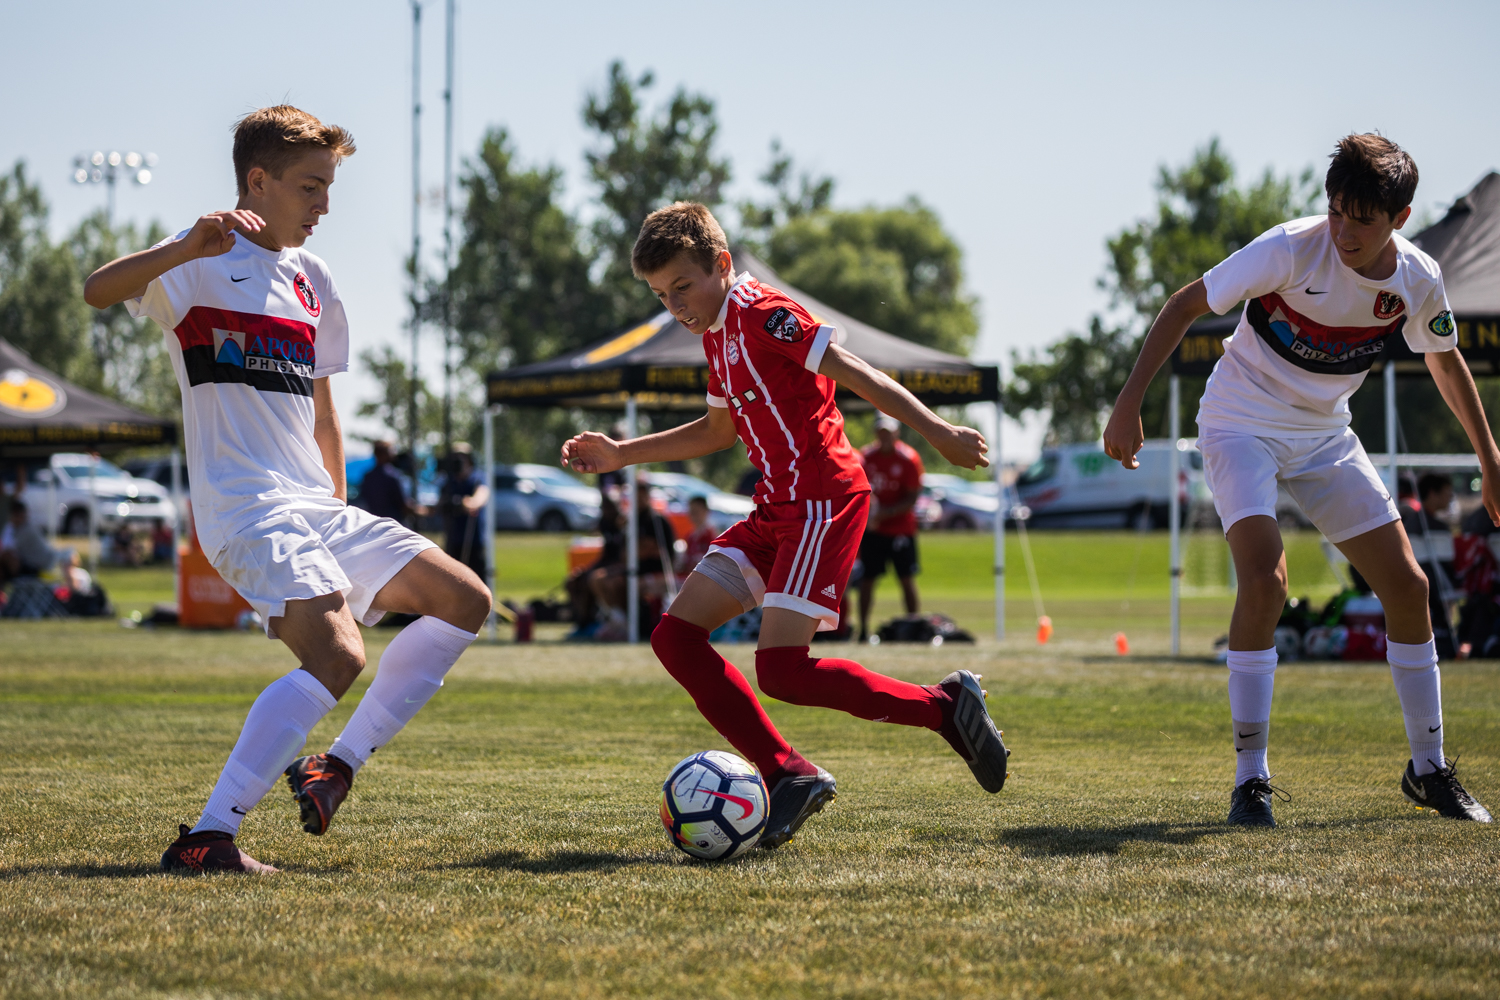 2018 US Club Soccer National Finals Club Soccer Youth Soccer